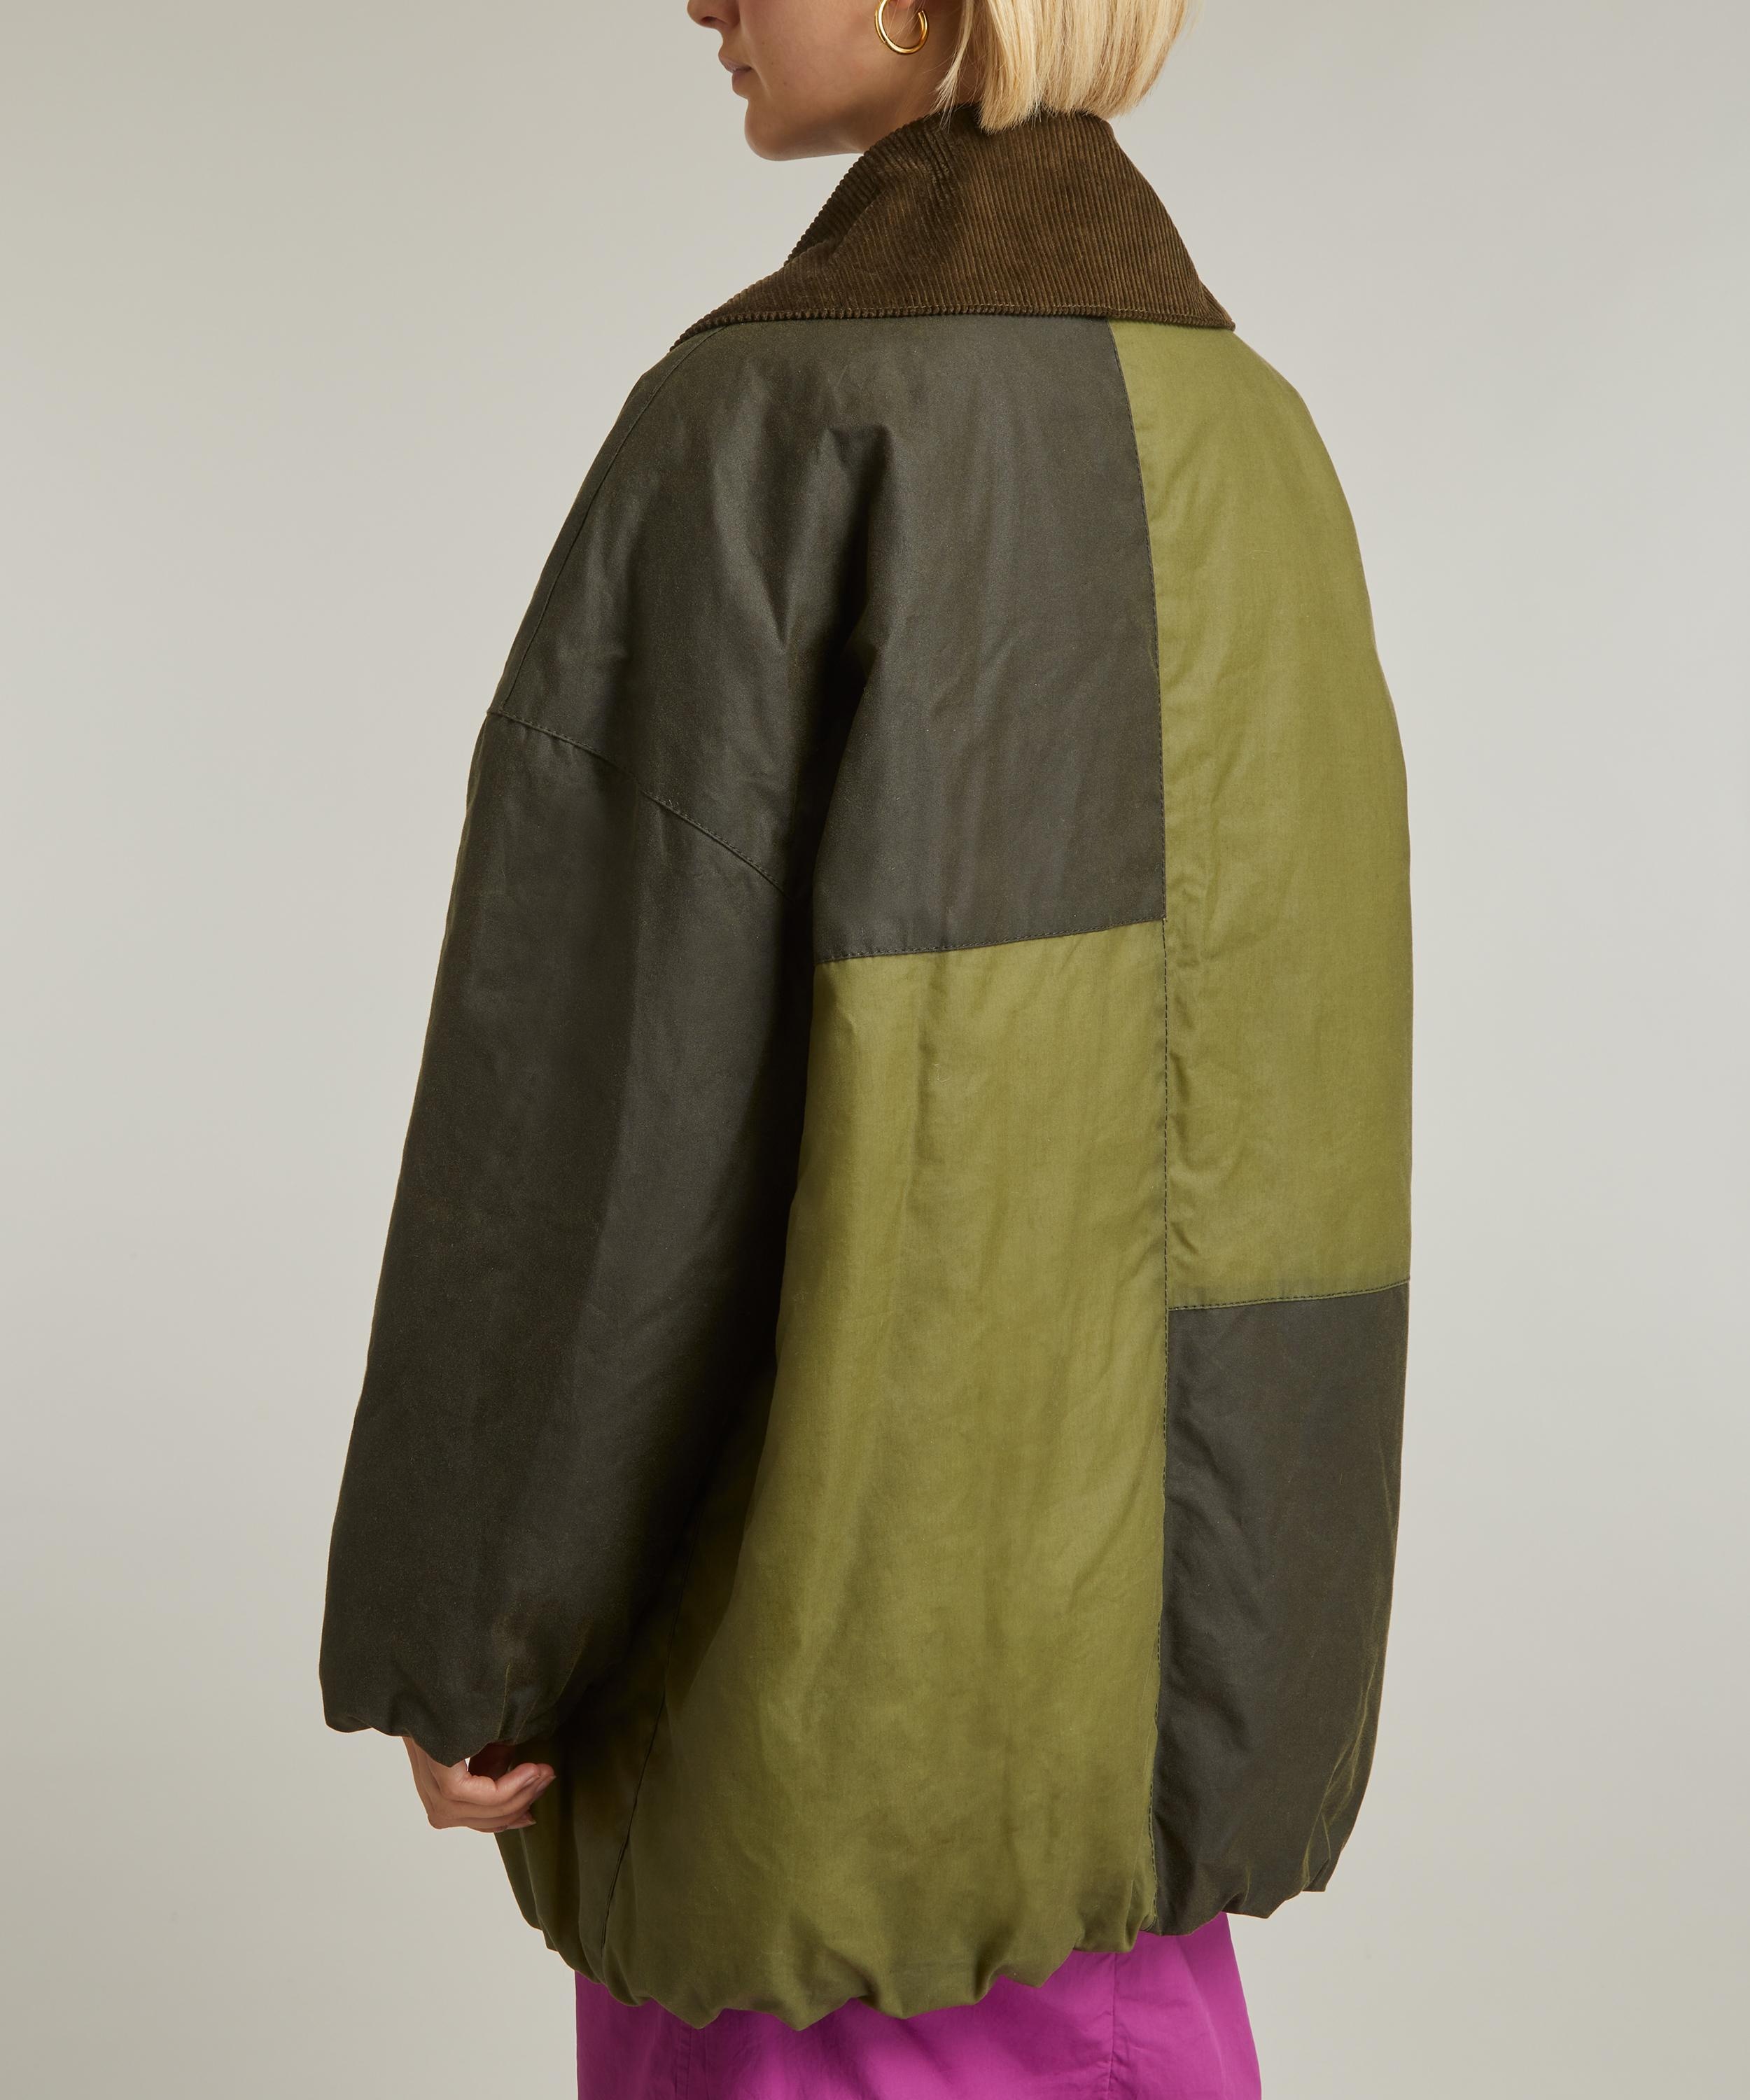 Barbour Spey Waxed Cotton Jacket - Farfetch